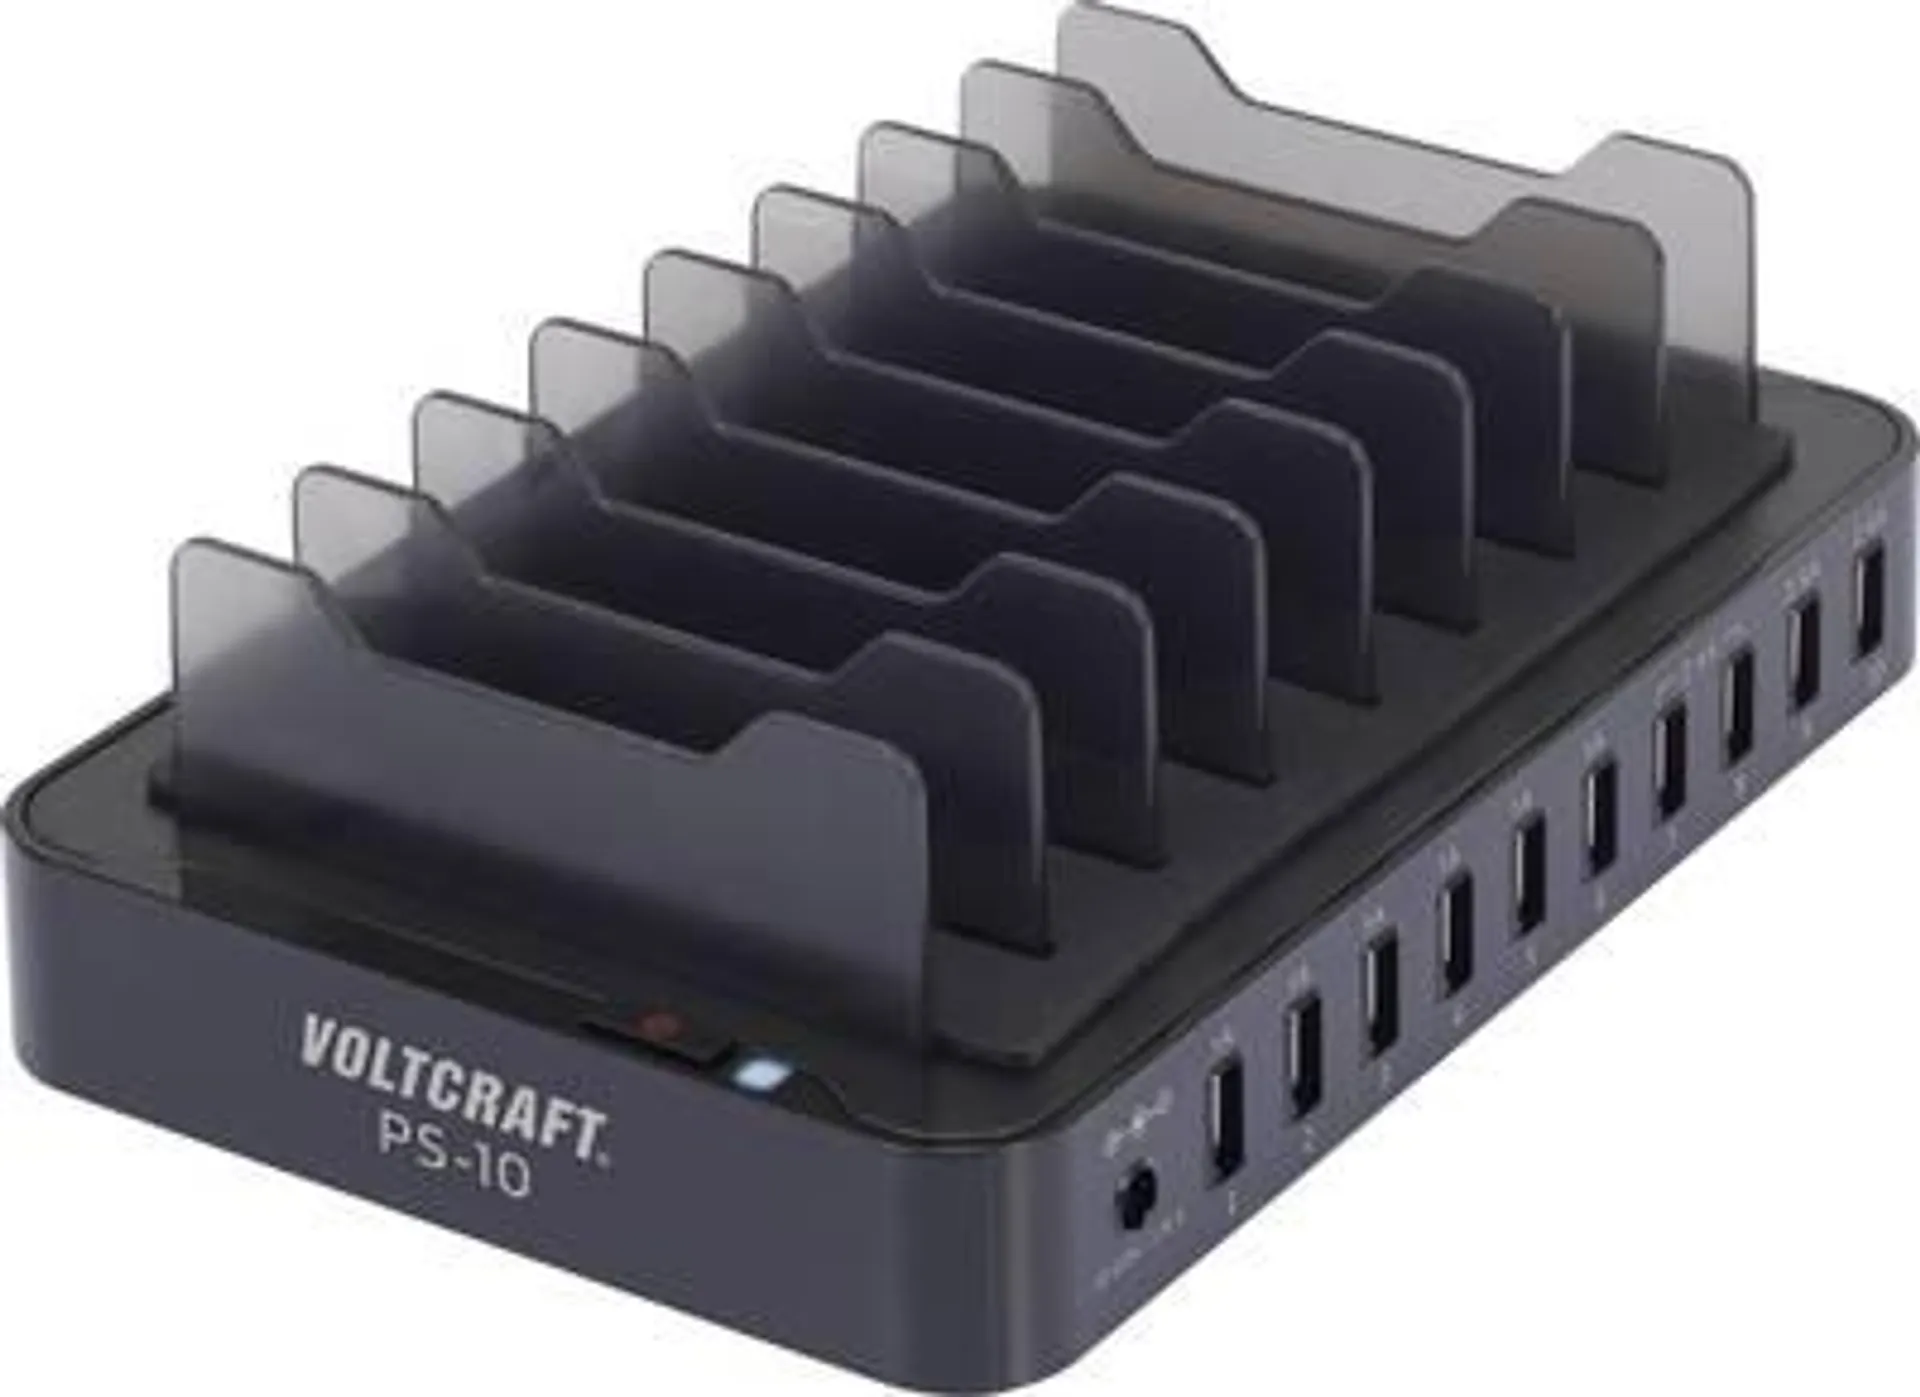 VOLTCRAFT PS-10 PS-10 USB charging station Mains socket Max. output current 13200 mA 10 x USB Auto-Detect